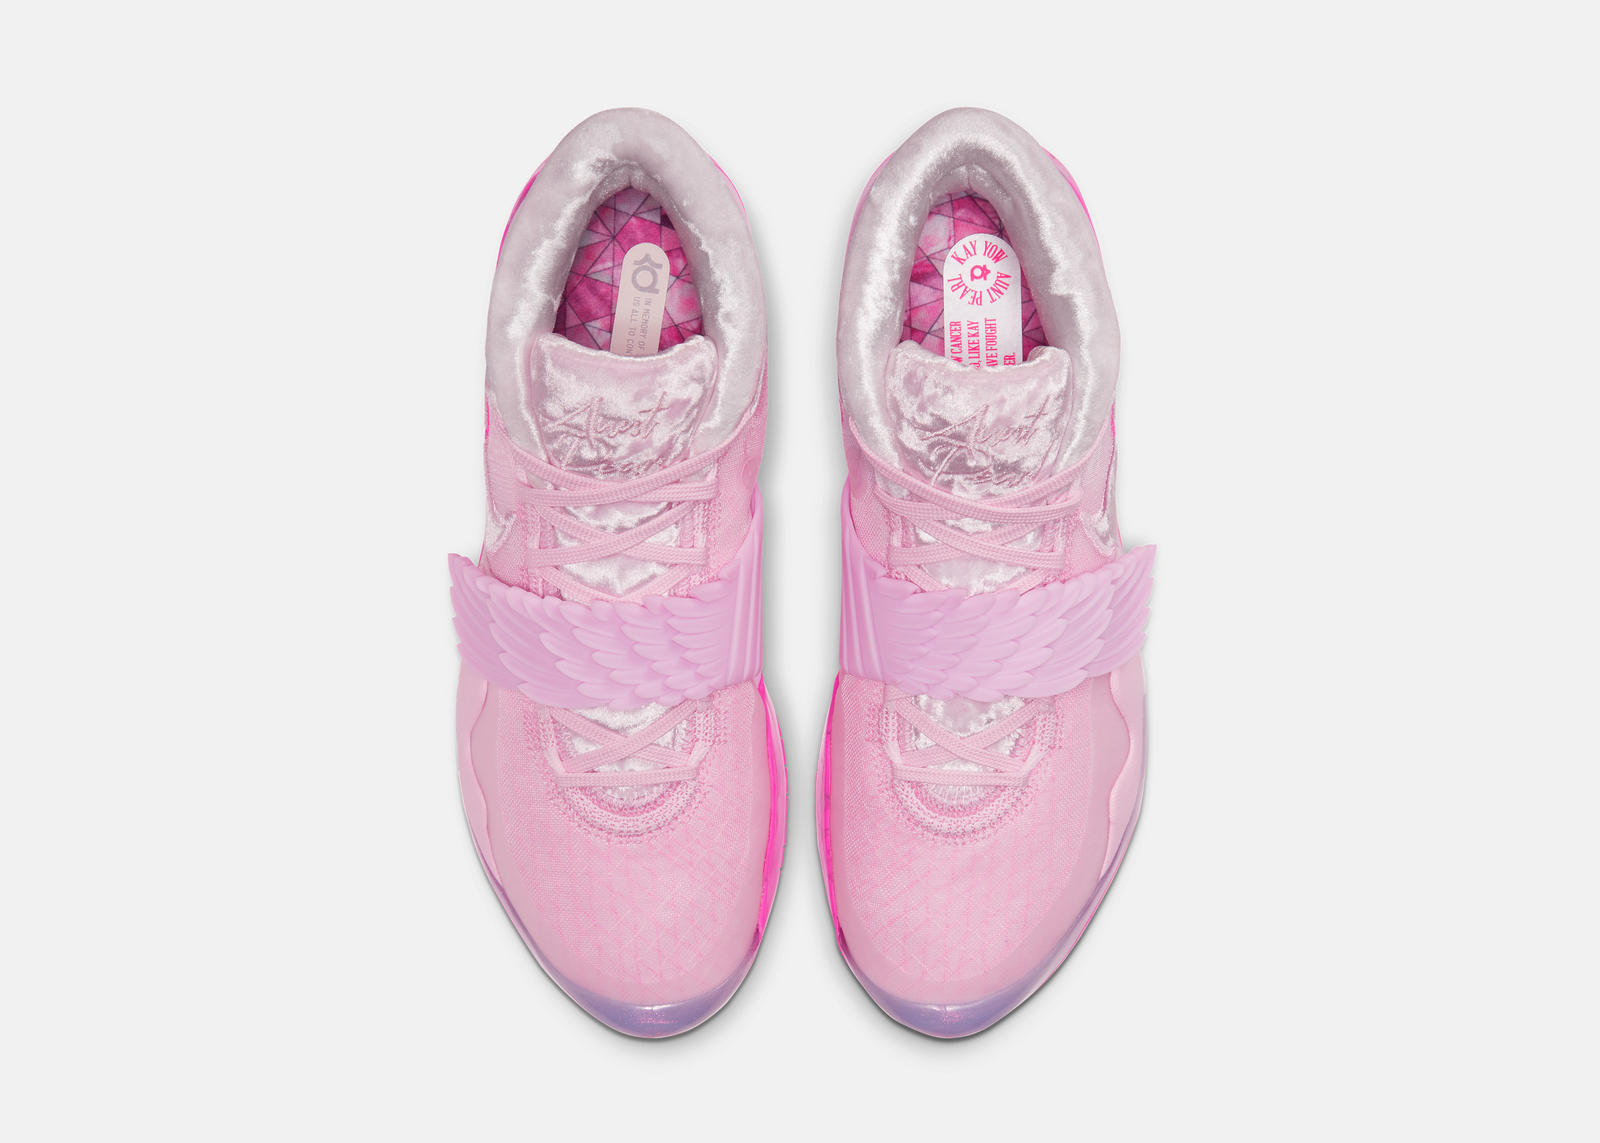 Nike KD 12 Kevin Durant Aunt Pearl